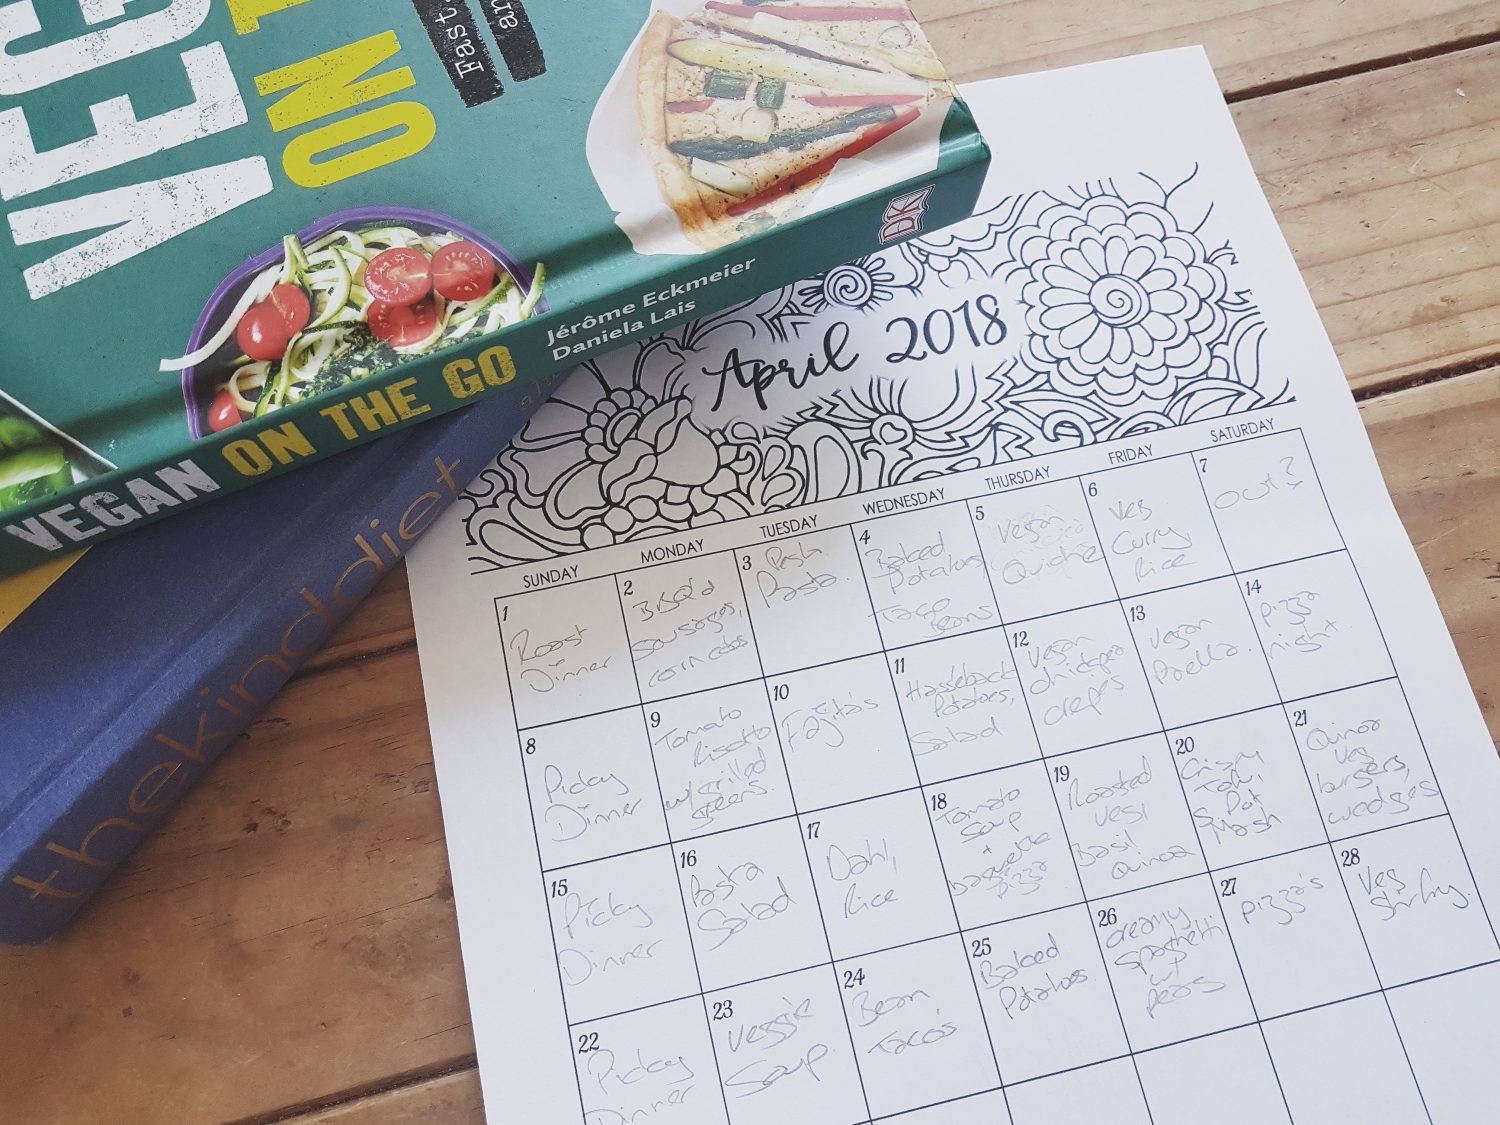 A family meal plan for April